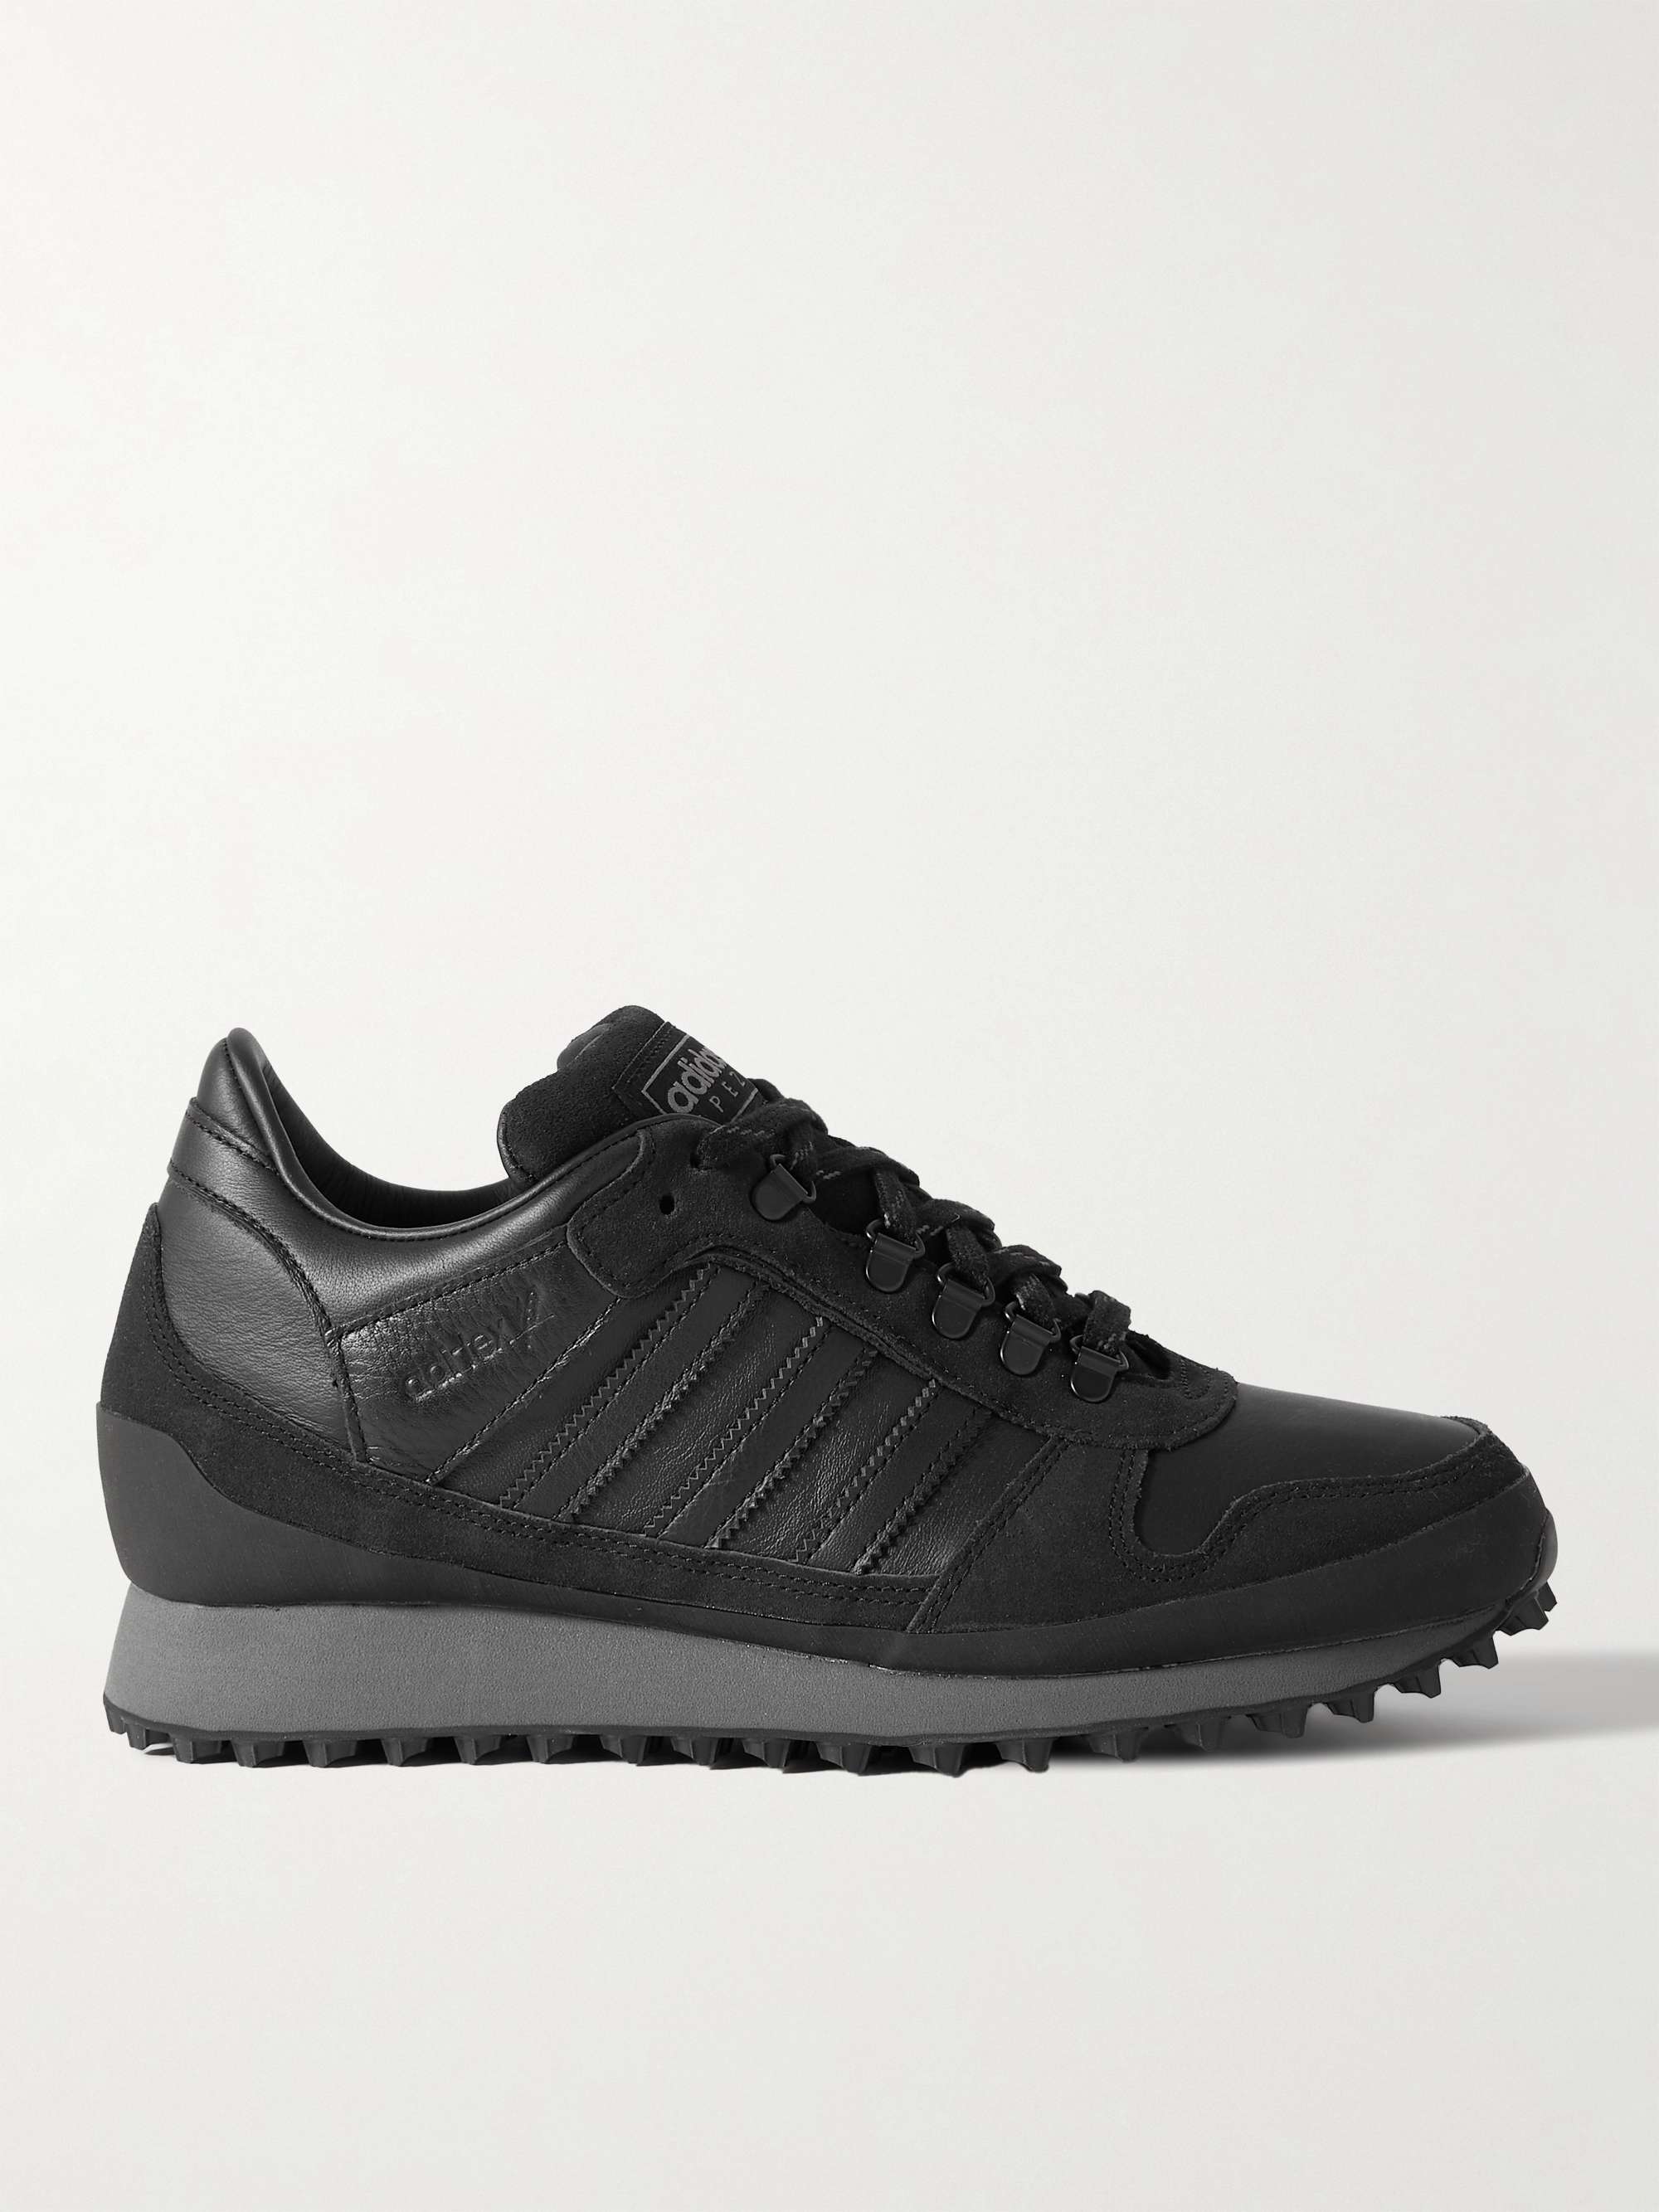 ADIDAS CONSORTIUM Hiaven SPZL Leather, Nubuck and Rubber-Trimmed Suede  Sneakers for Men | MR PORTER